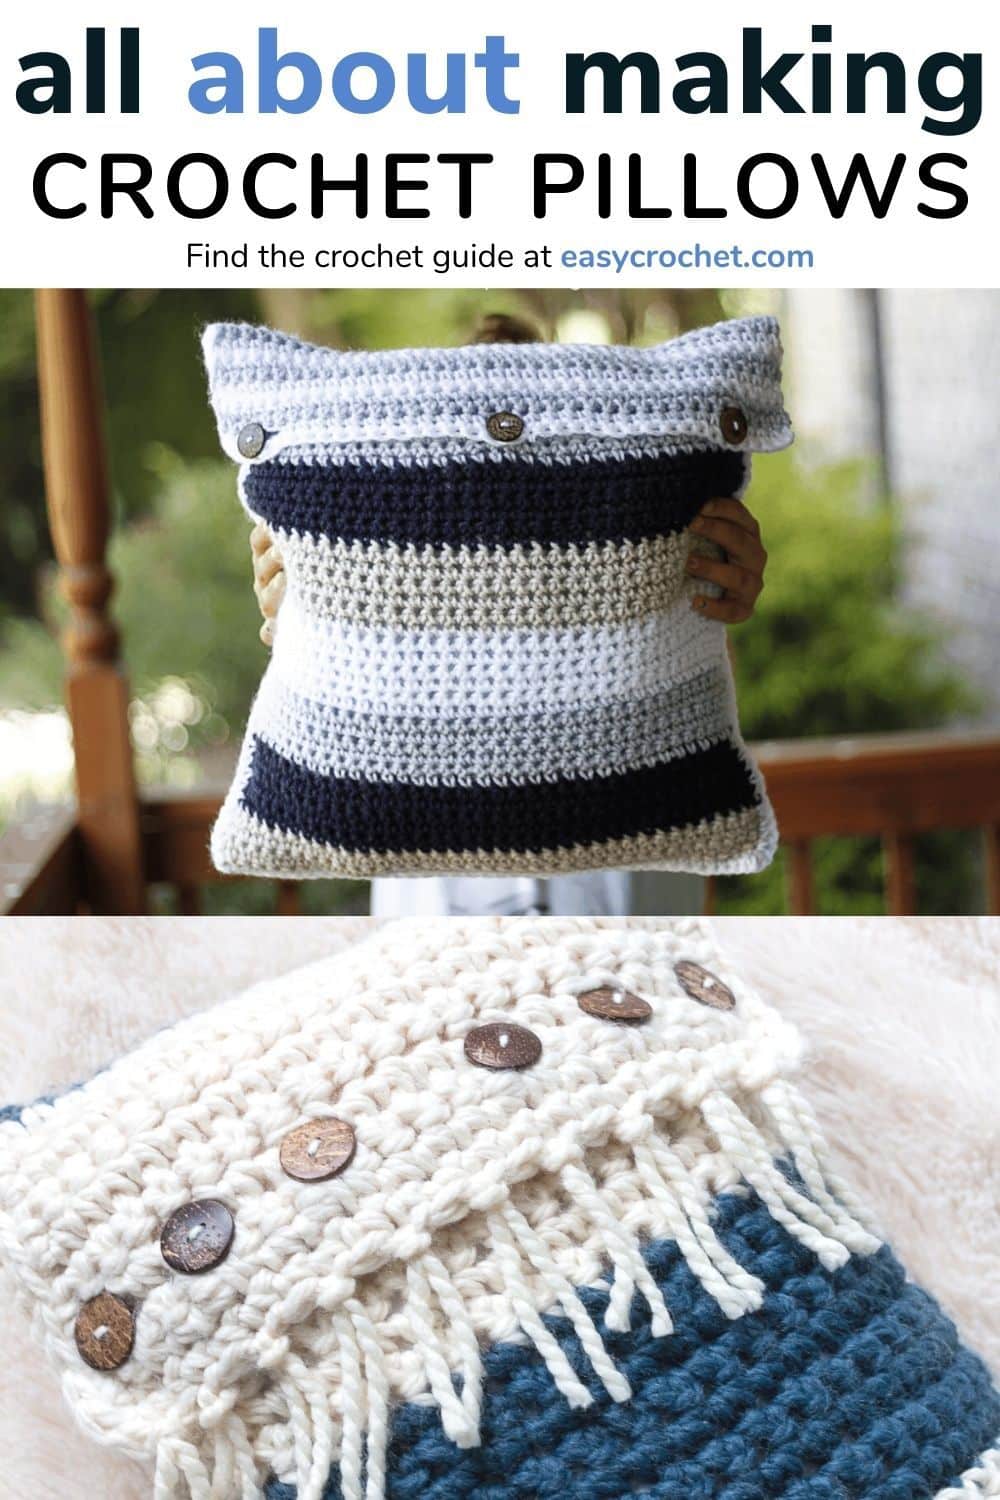 How to Make a Croche Pillow Guide